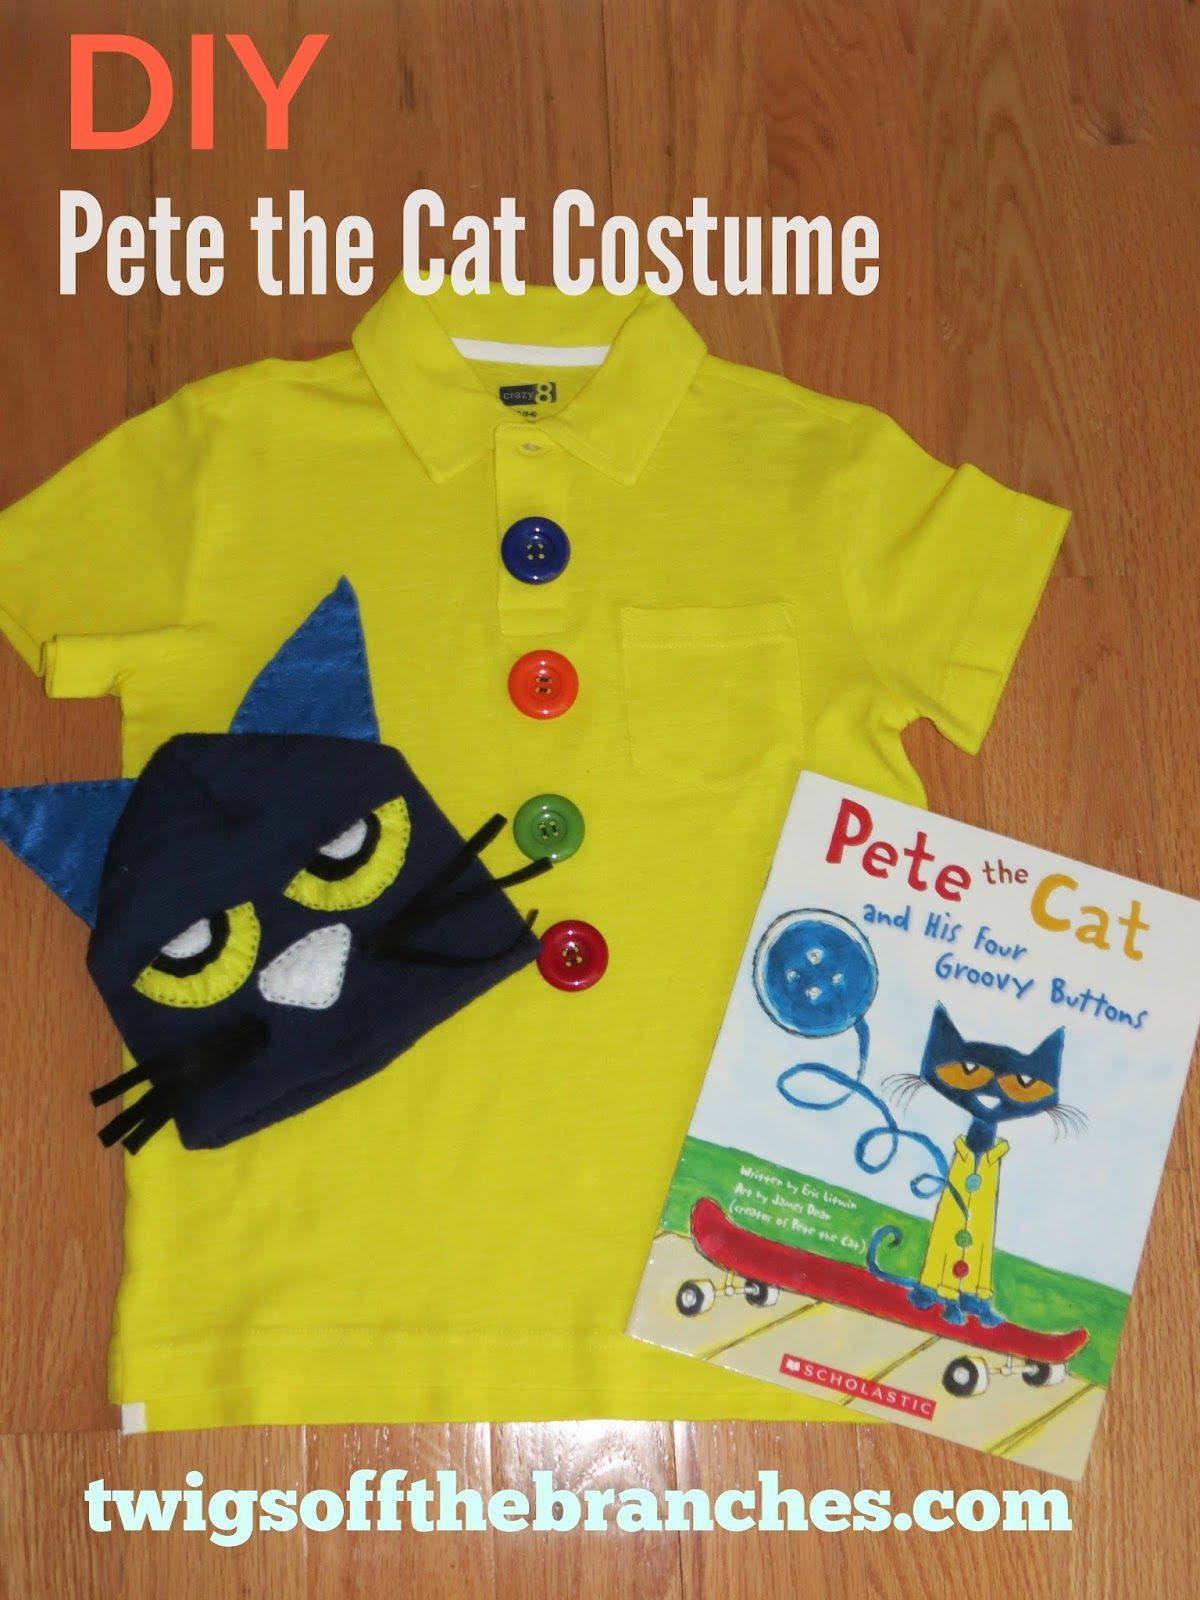 Pete The Cat Costume DIY
 Twigs f the Branches Easy DIY Pete the Cat Costume for